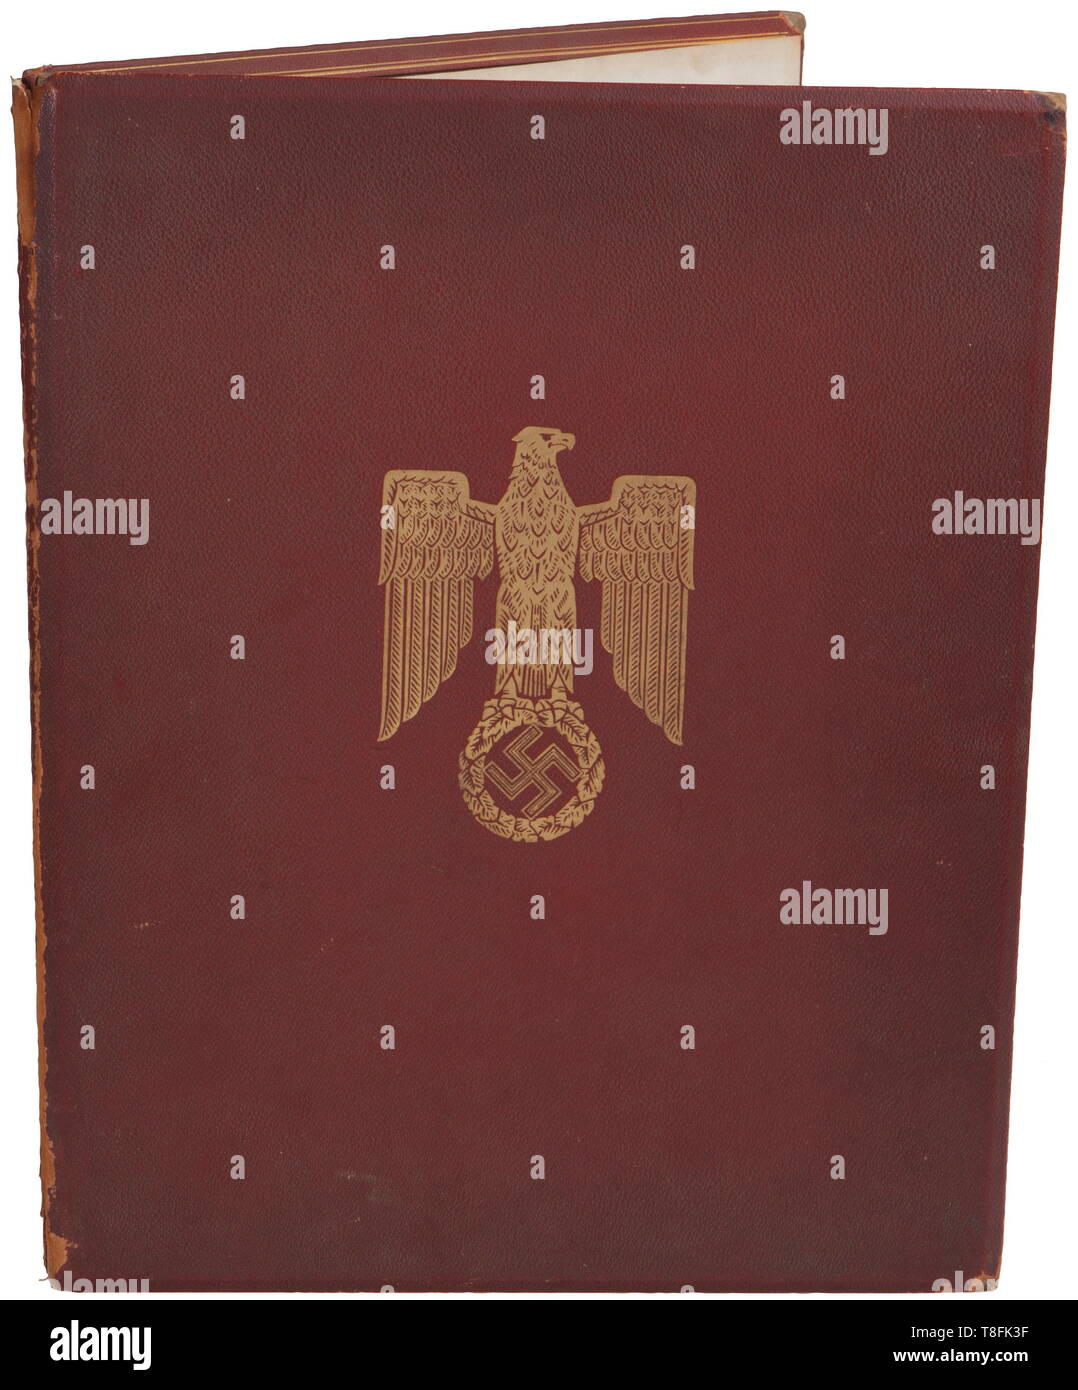 Kapitänleutnant Hermann Rasch - an award document with folder for the  Knight's Cross of the Iron Cross of 1939 Large, double-page parchment  document to the then Kapitänleutnant with calligraphic text and national